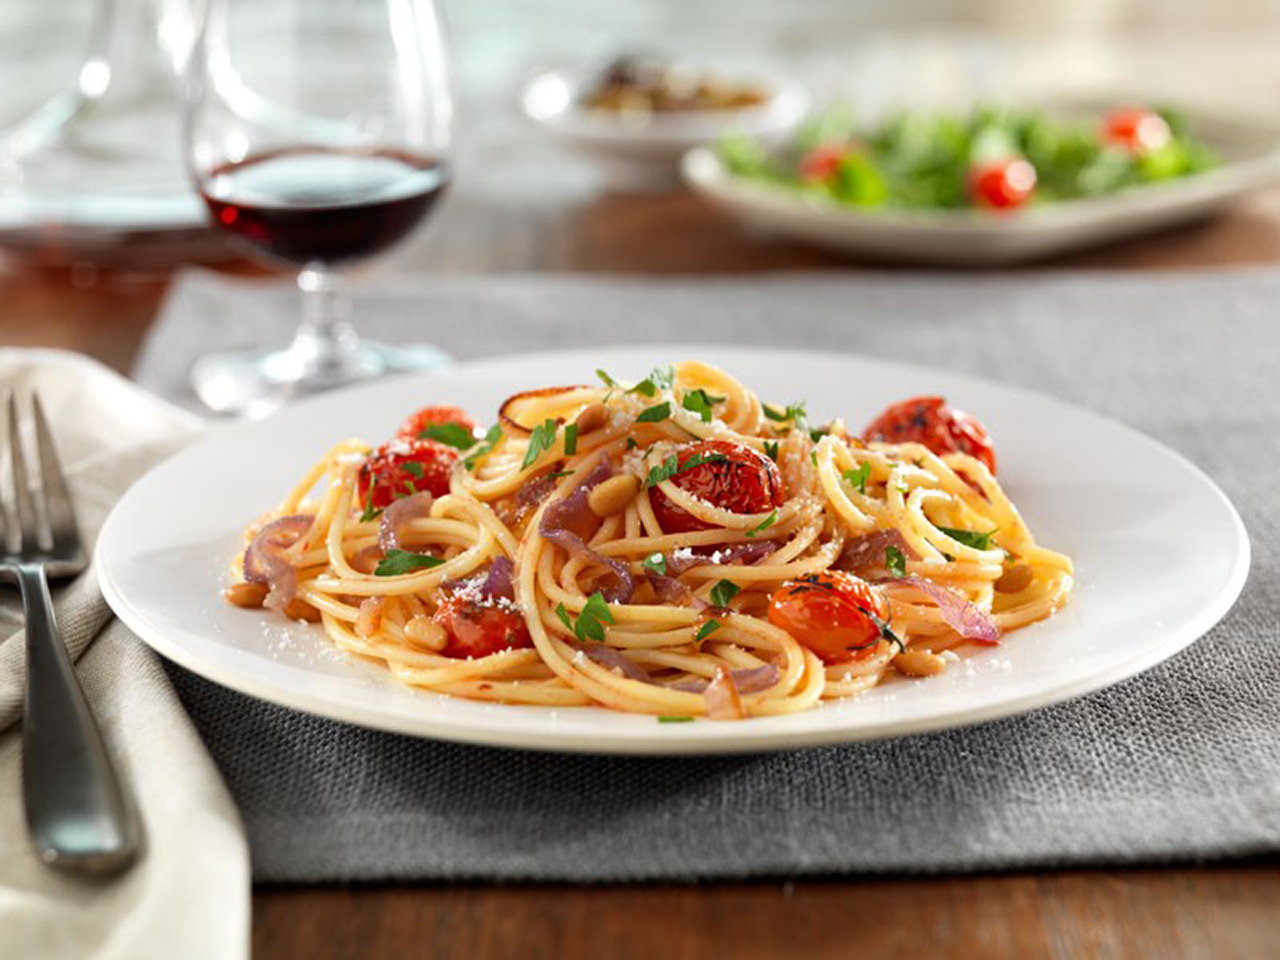 Barilla® Gluten Free Spaghetti with Caramelized Red Onions and Whole Cherry Tomatoes, Pine Nuts and Pecorino Cheese